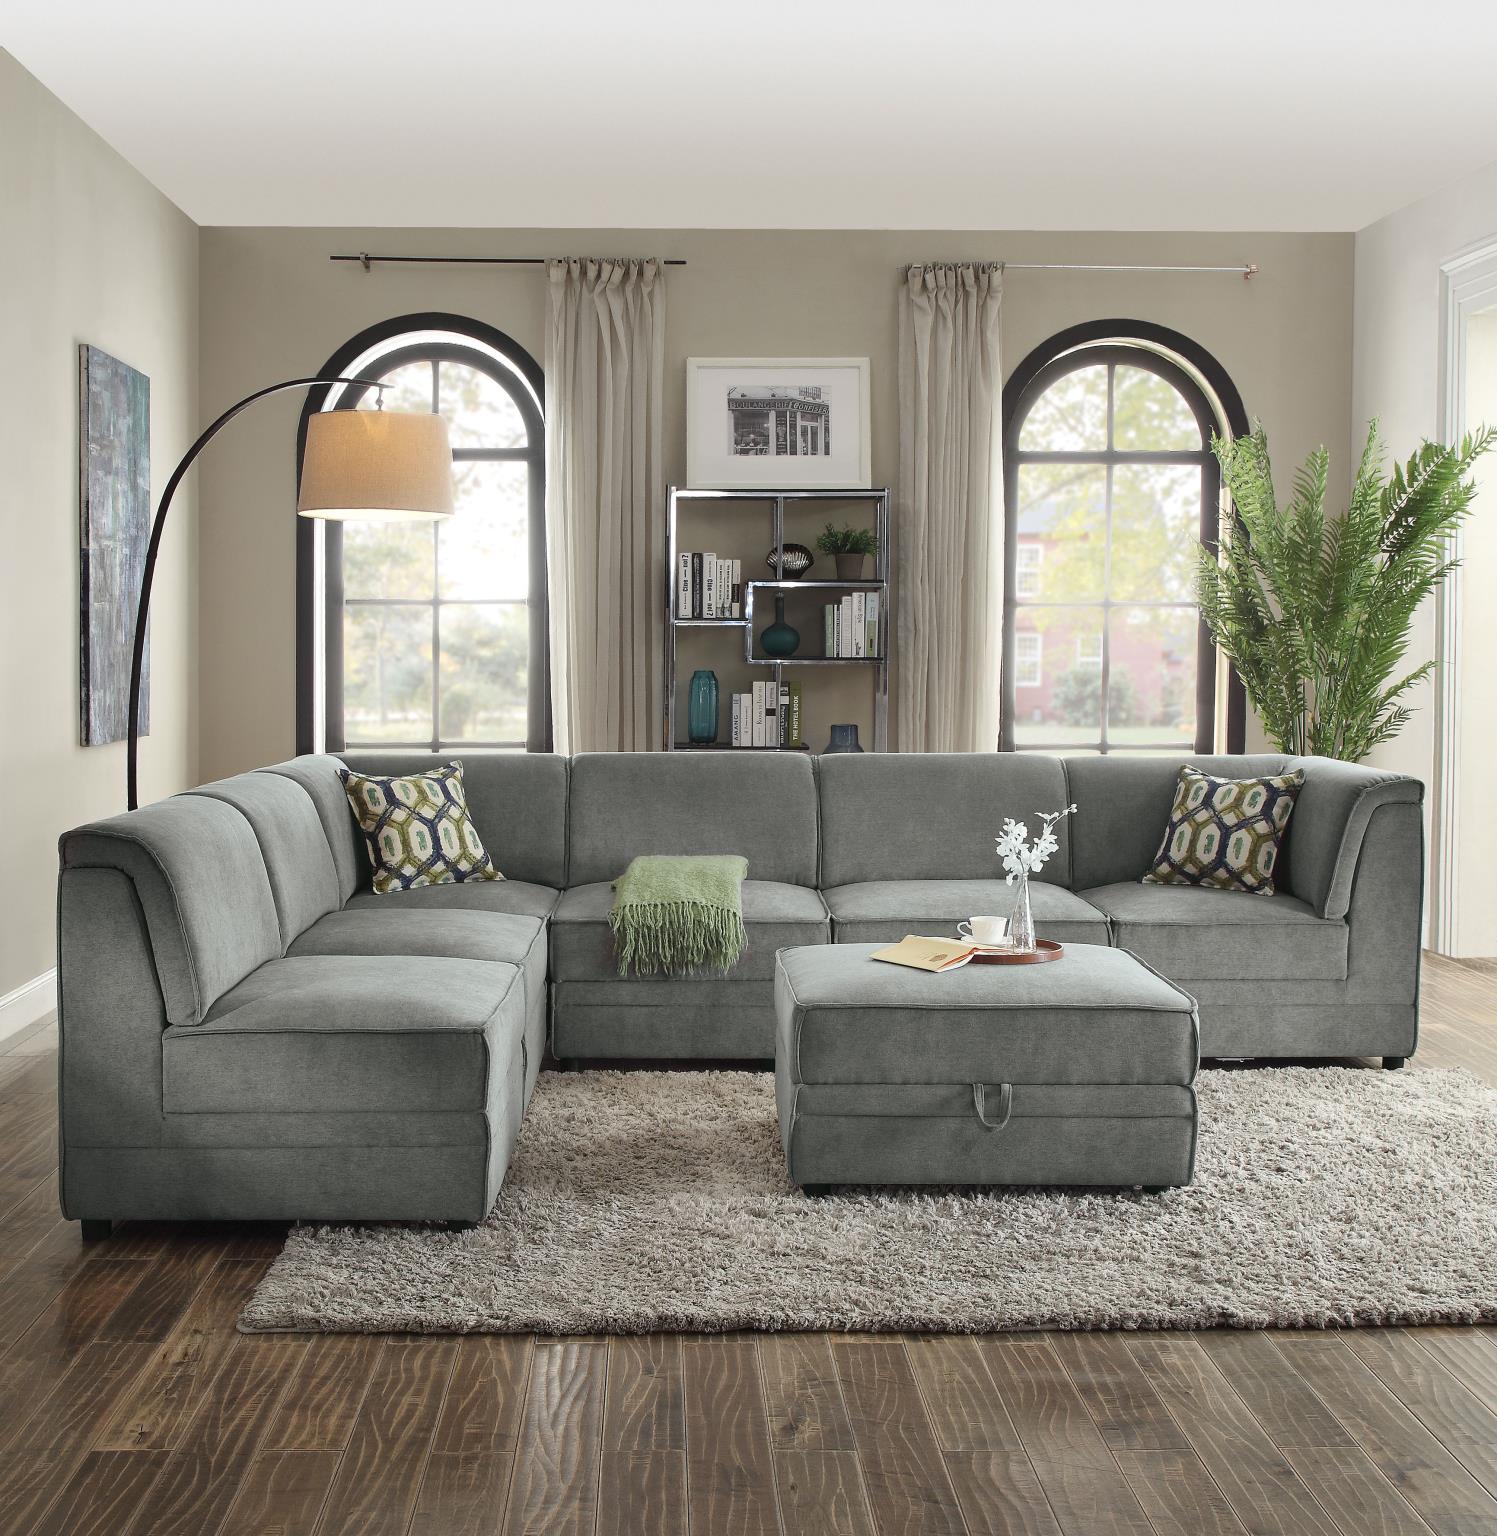 Complete Sectional Sofa w/ 4 Armless Chairs, 2 Corners, and 1 Ottoman